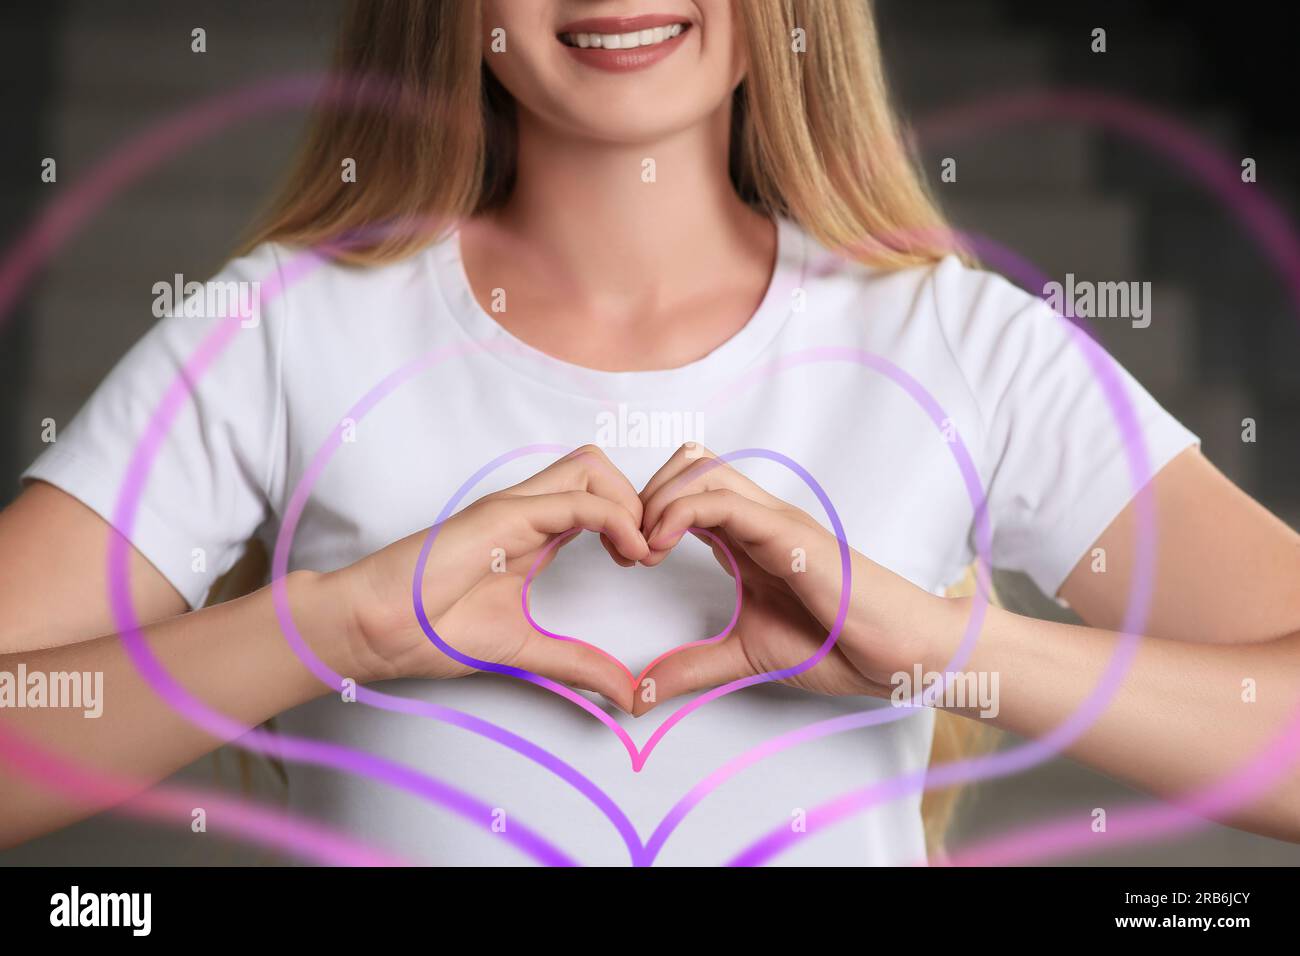 Empathy. Smiling woman sharing positive vibes, closeup. Concentric hearts flying out of her hands as symbol of support Stock Photo